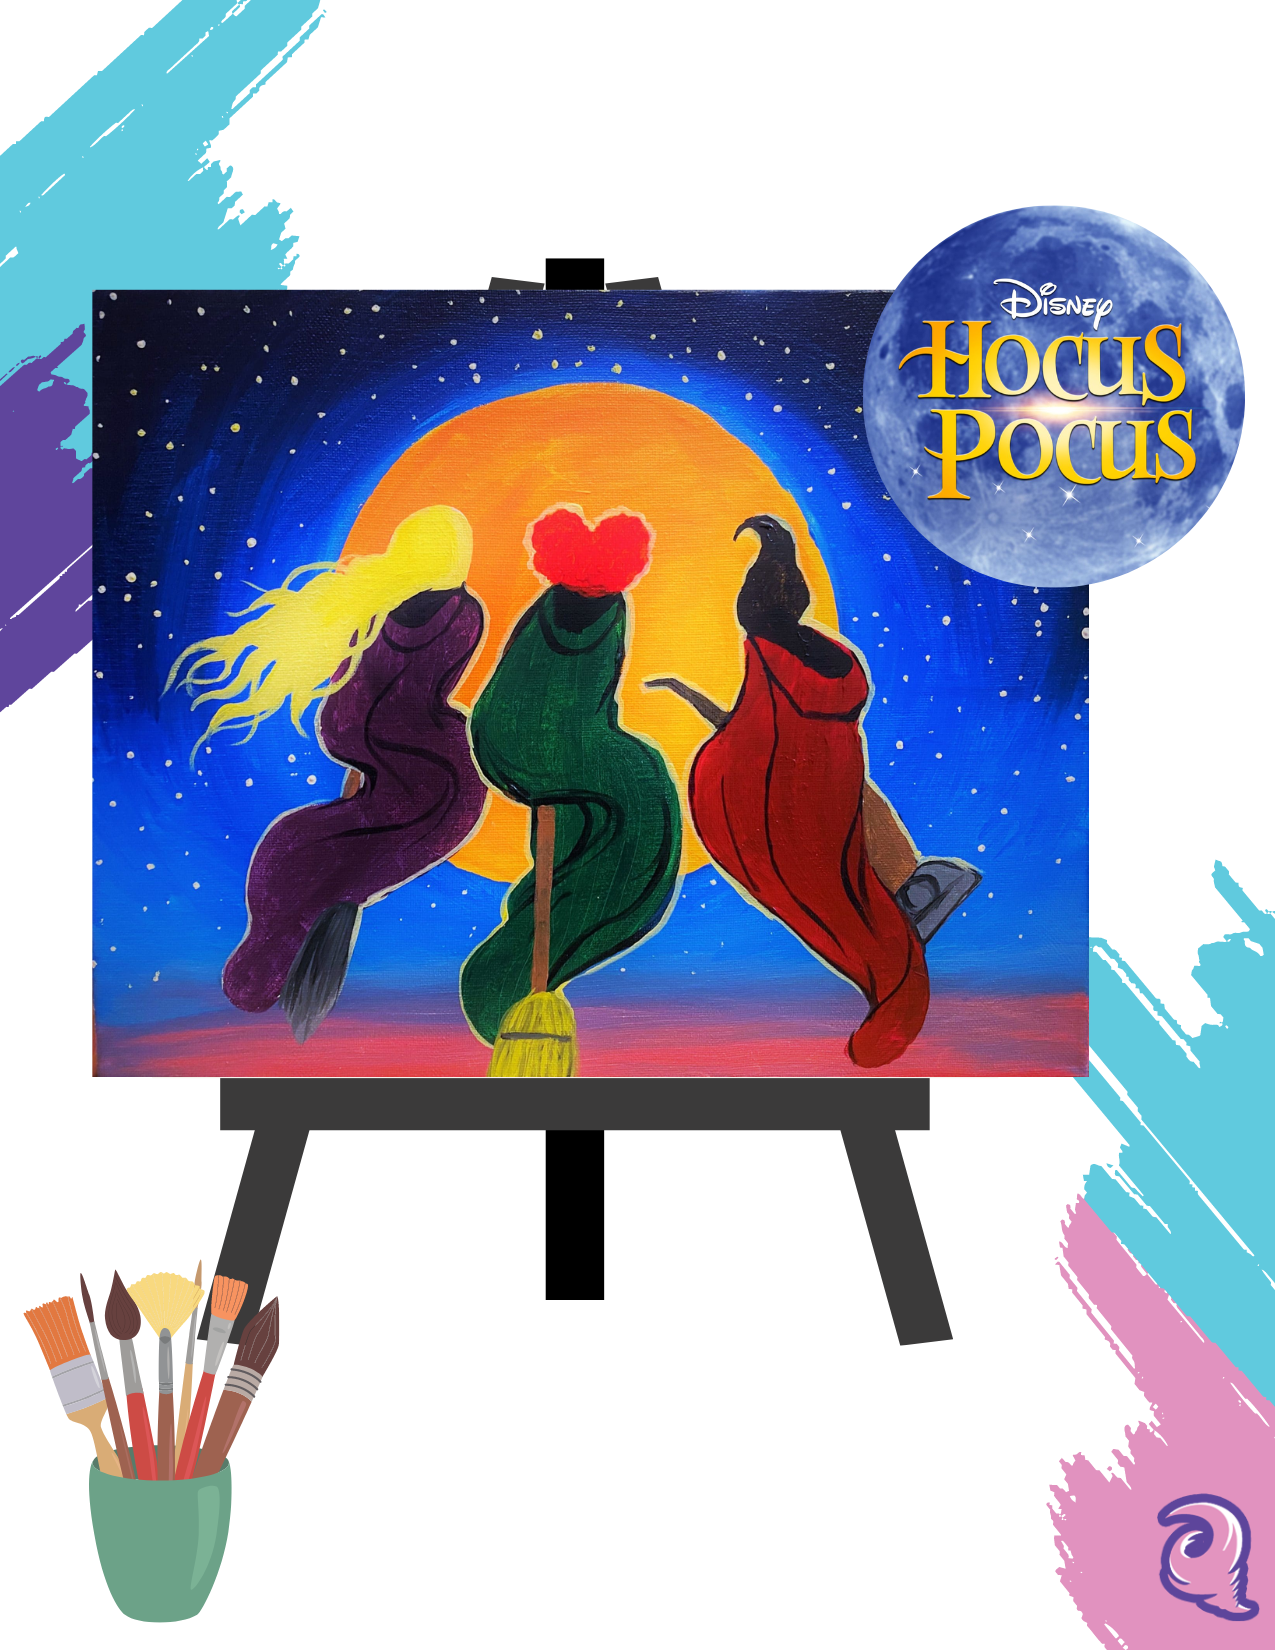 Candy and canvas Hocus Pocus